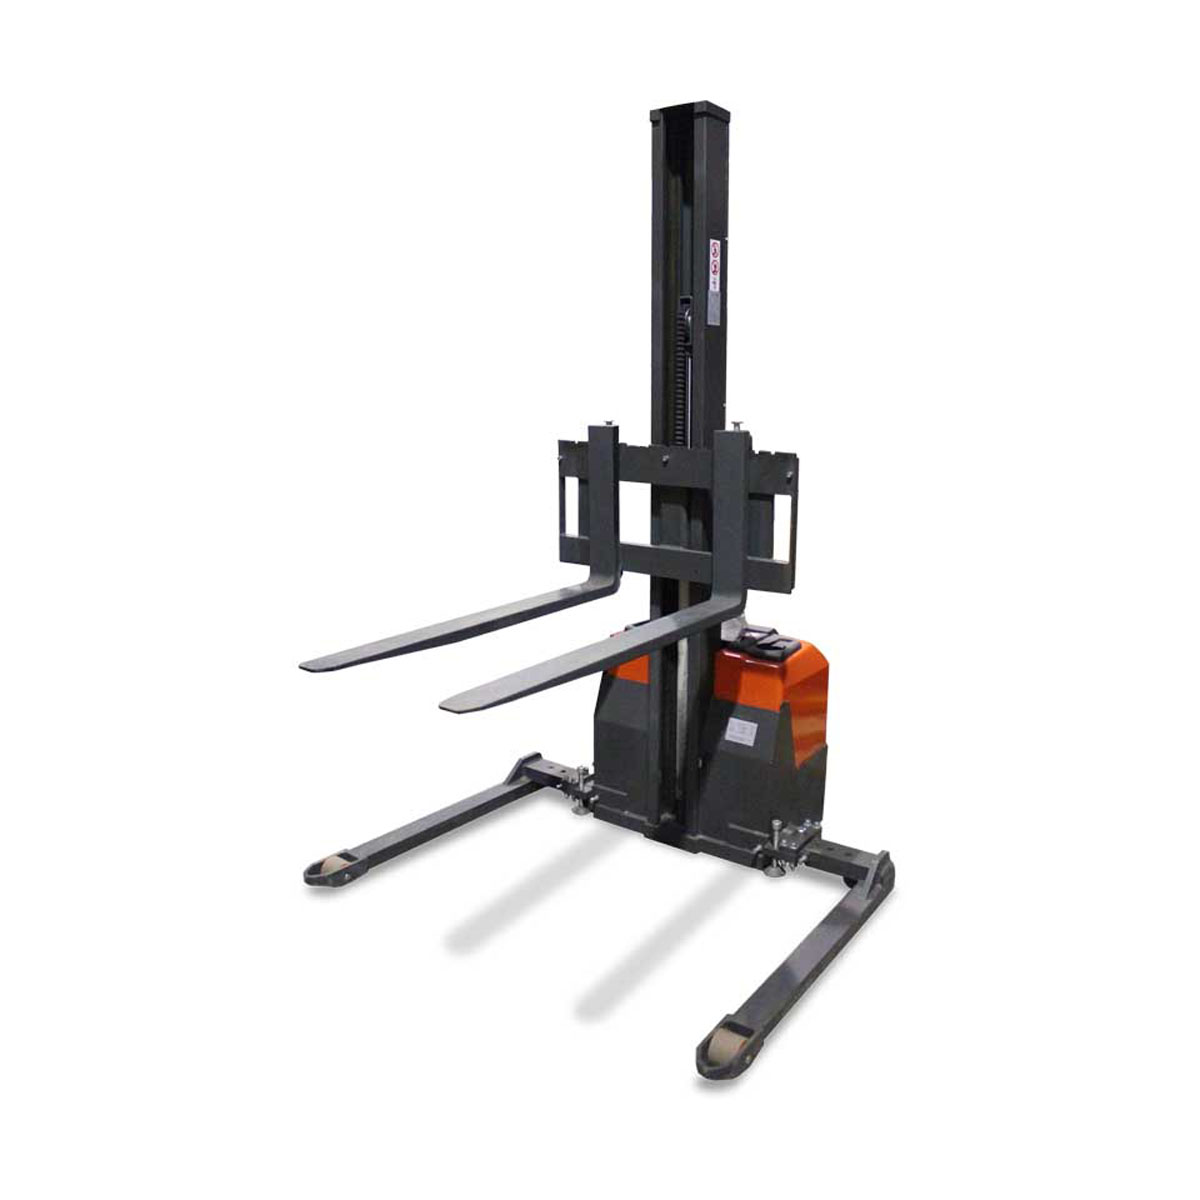 Buy Electric Straddle Stacker in Pallet Stackers from Astrolift NZ